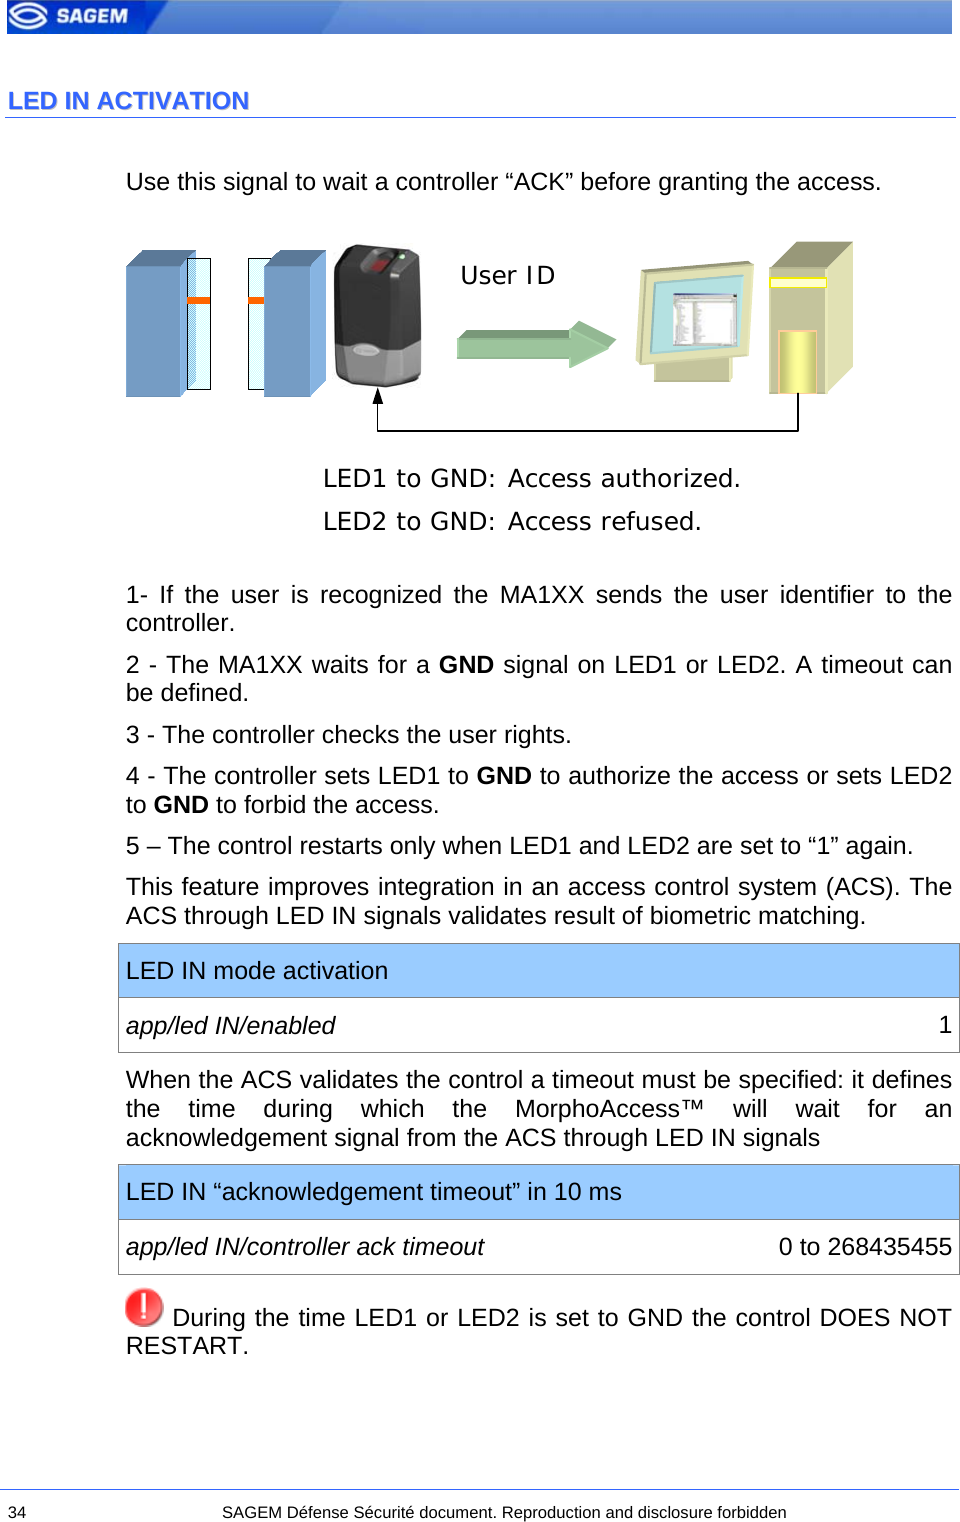  LLEEDD  IINN  AACCTTIIVVAATTIIOONN  Use this signal to wait a controller “ACK” before granting the access.       User ID  LED1 to GND: Access authorized. LED2 to GND: Access refused.   1- If the user is recognized the MA1XX sends the user identifier to the controller. 2 - The MA1XX waits for a GND signal on LED1 or LED2. A timeout can be defined. 3 - The controller checks the user rights. 4 - The controller sets LED1 to GND to authorize the access or sets LED2 to GND to forbid the access. 5 – The control restarts only when LED1 and LED2 are set to “1” again. This feature improves integration in an access control system (ACS). The ACS through LED IN signals validates result of biometric matching. LED IN mode activation app/led IN/enabled  1When the ACS validates the control a timeout must be specified: it defines the time during which the MorphoAccess™ will wait for an acknowledgement signal from the ACS through LED IN signals LED IN “acknowledgement timeout” in 10 ms app/led IN/controller ack timeout  0 to 268435455 During the time LED1 or LED2 is set to GND the control DOES NOT RESTART. 34  SAGEM Défense Sécurité document. Reproduction and disclosure forbidden  